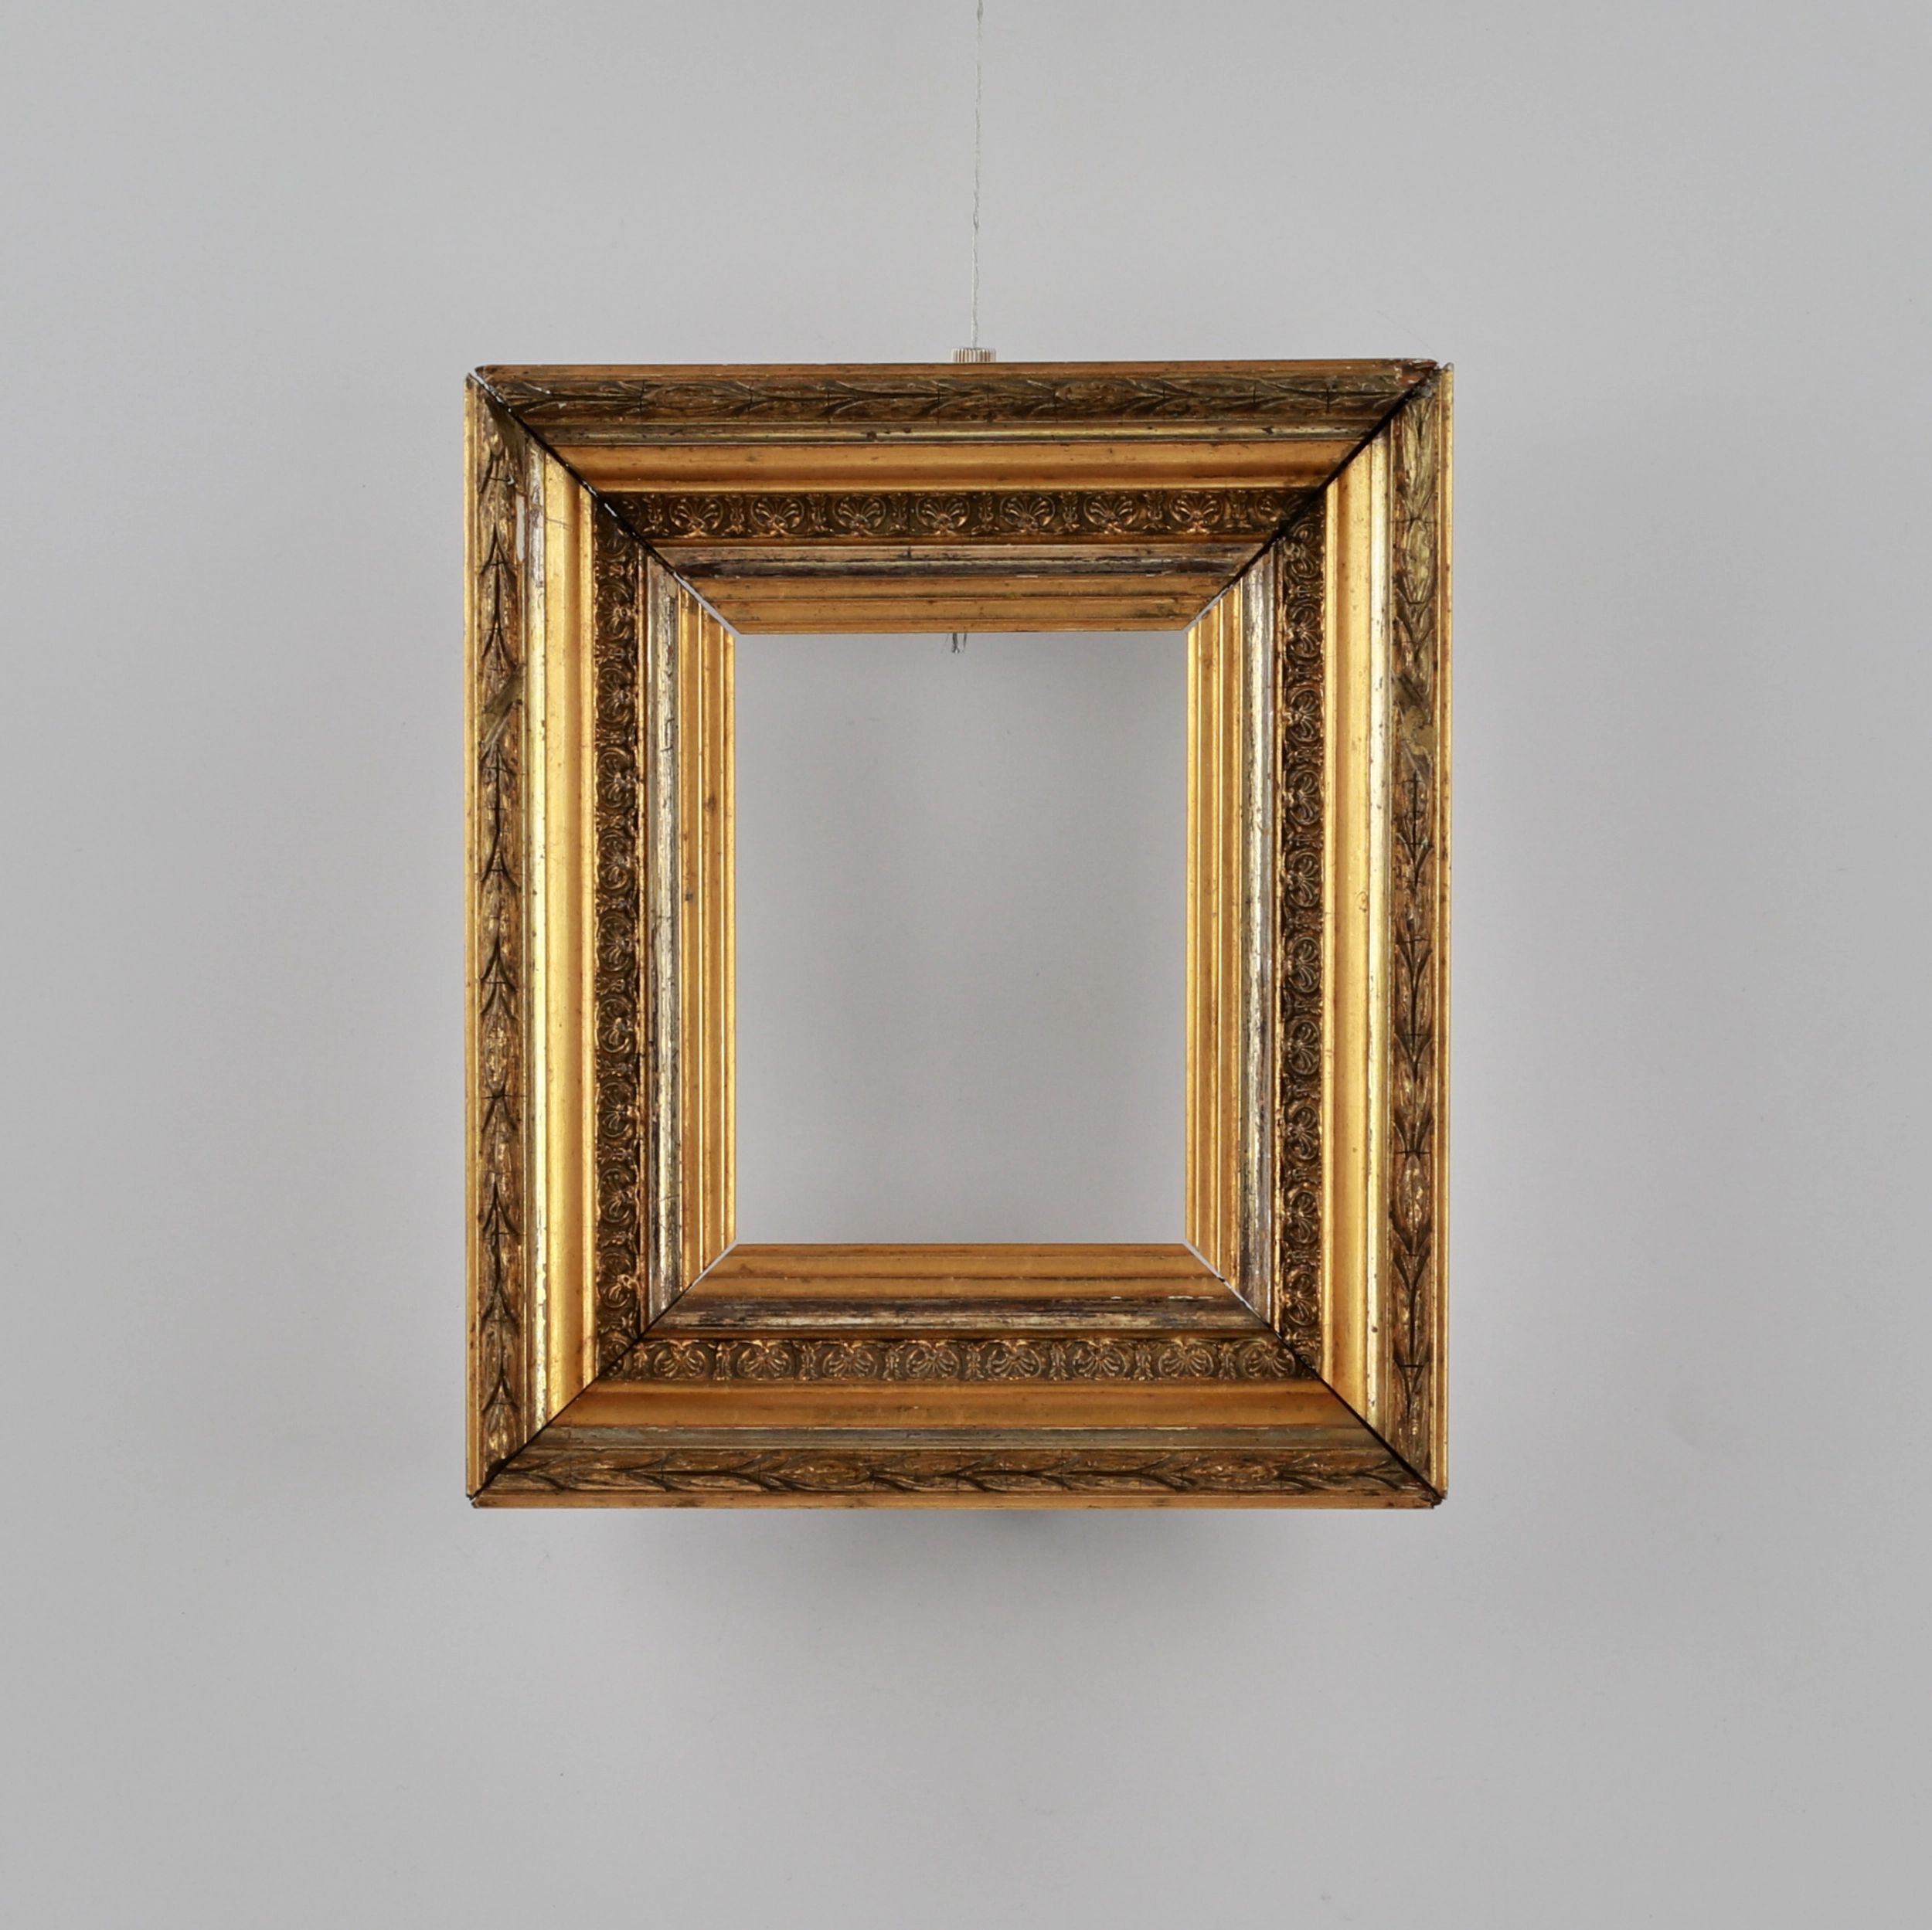 Gilded-two-baguette-picture-frame